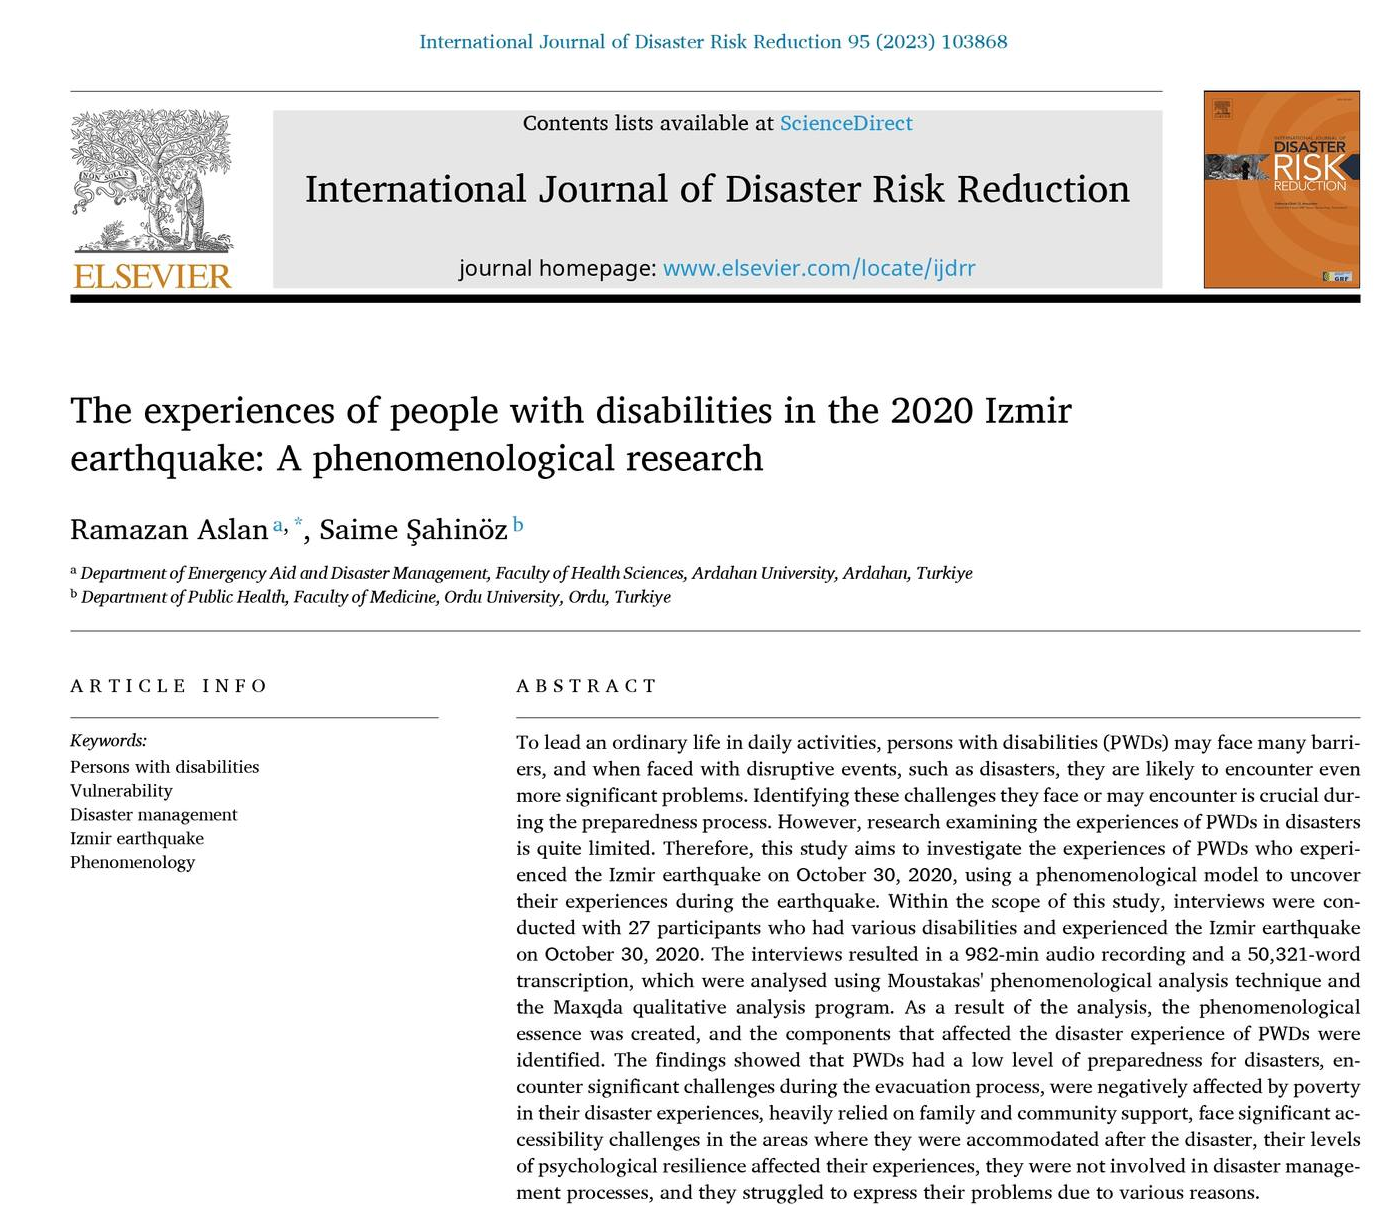 Un articolo turco: "The experiences of people with disabilities in the 2020 Izmir earthquake: A phenomenological research"